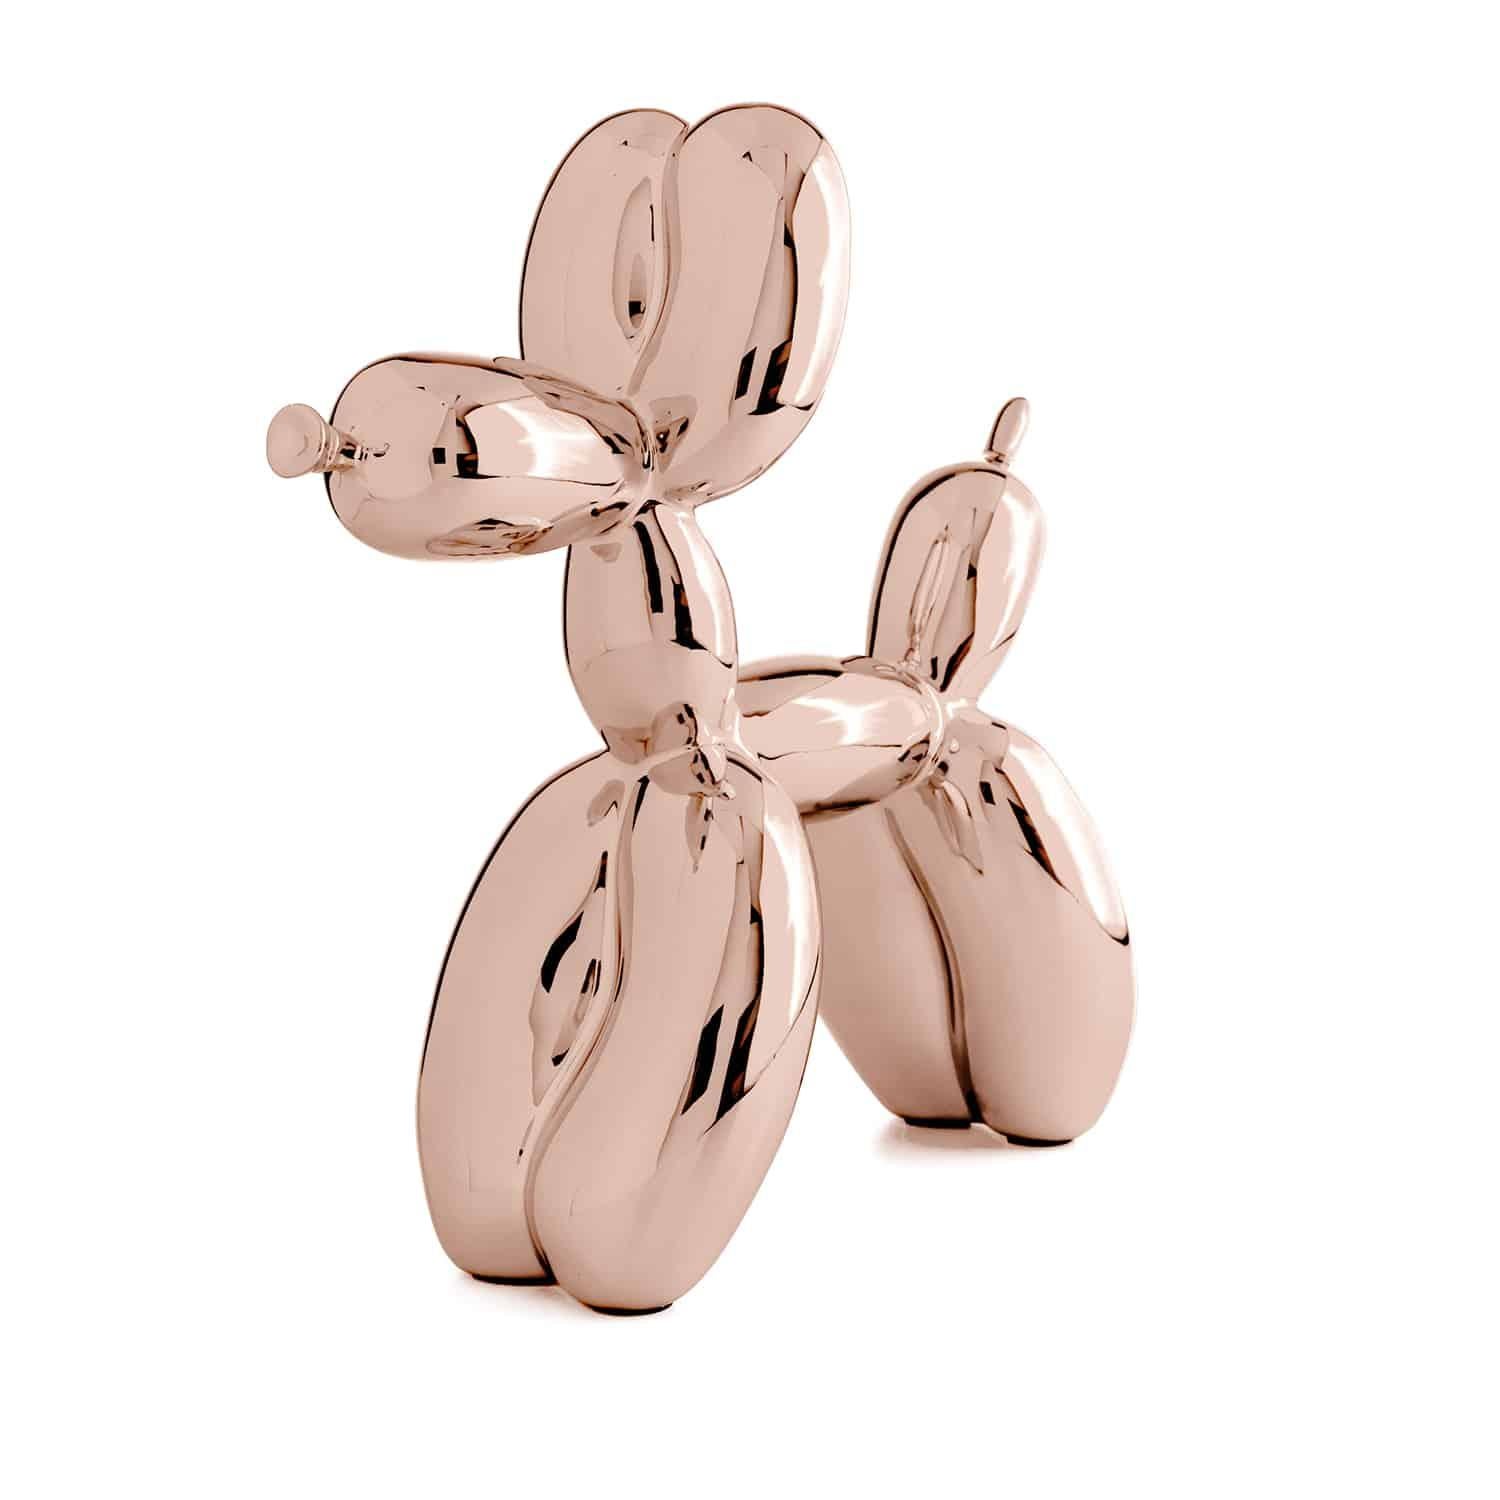 Balloon Dog ( After ) - Rosé Gold - Sculpture by After Jeff Koons